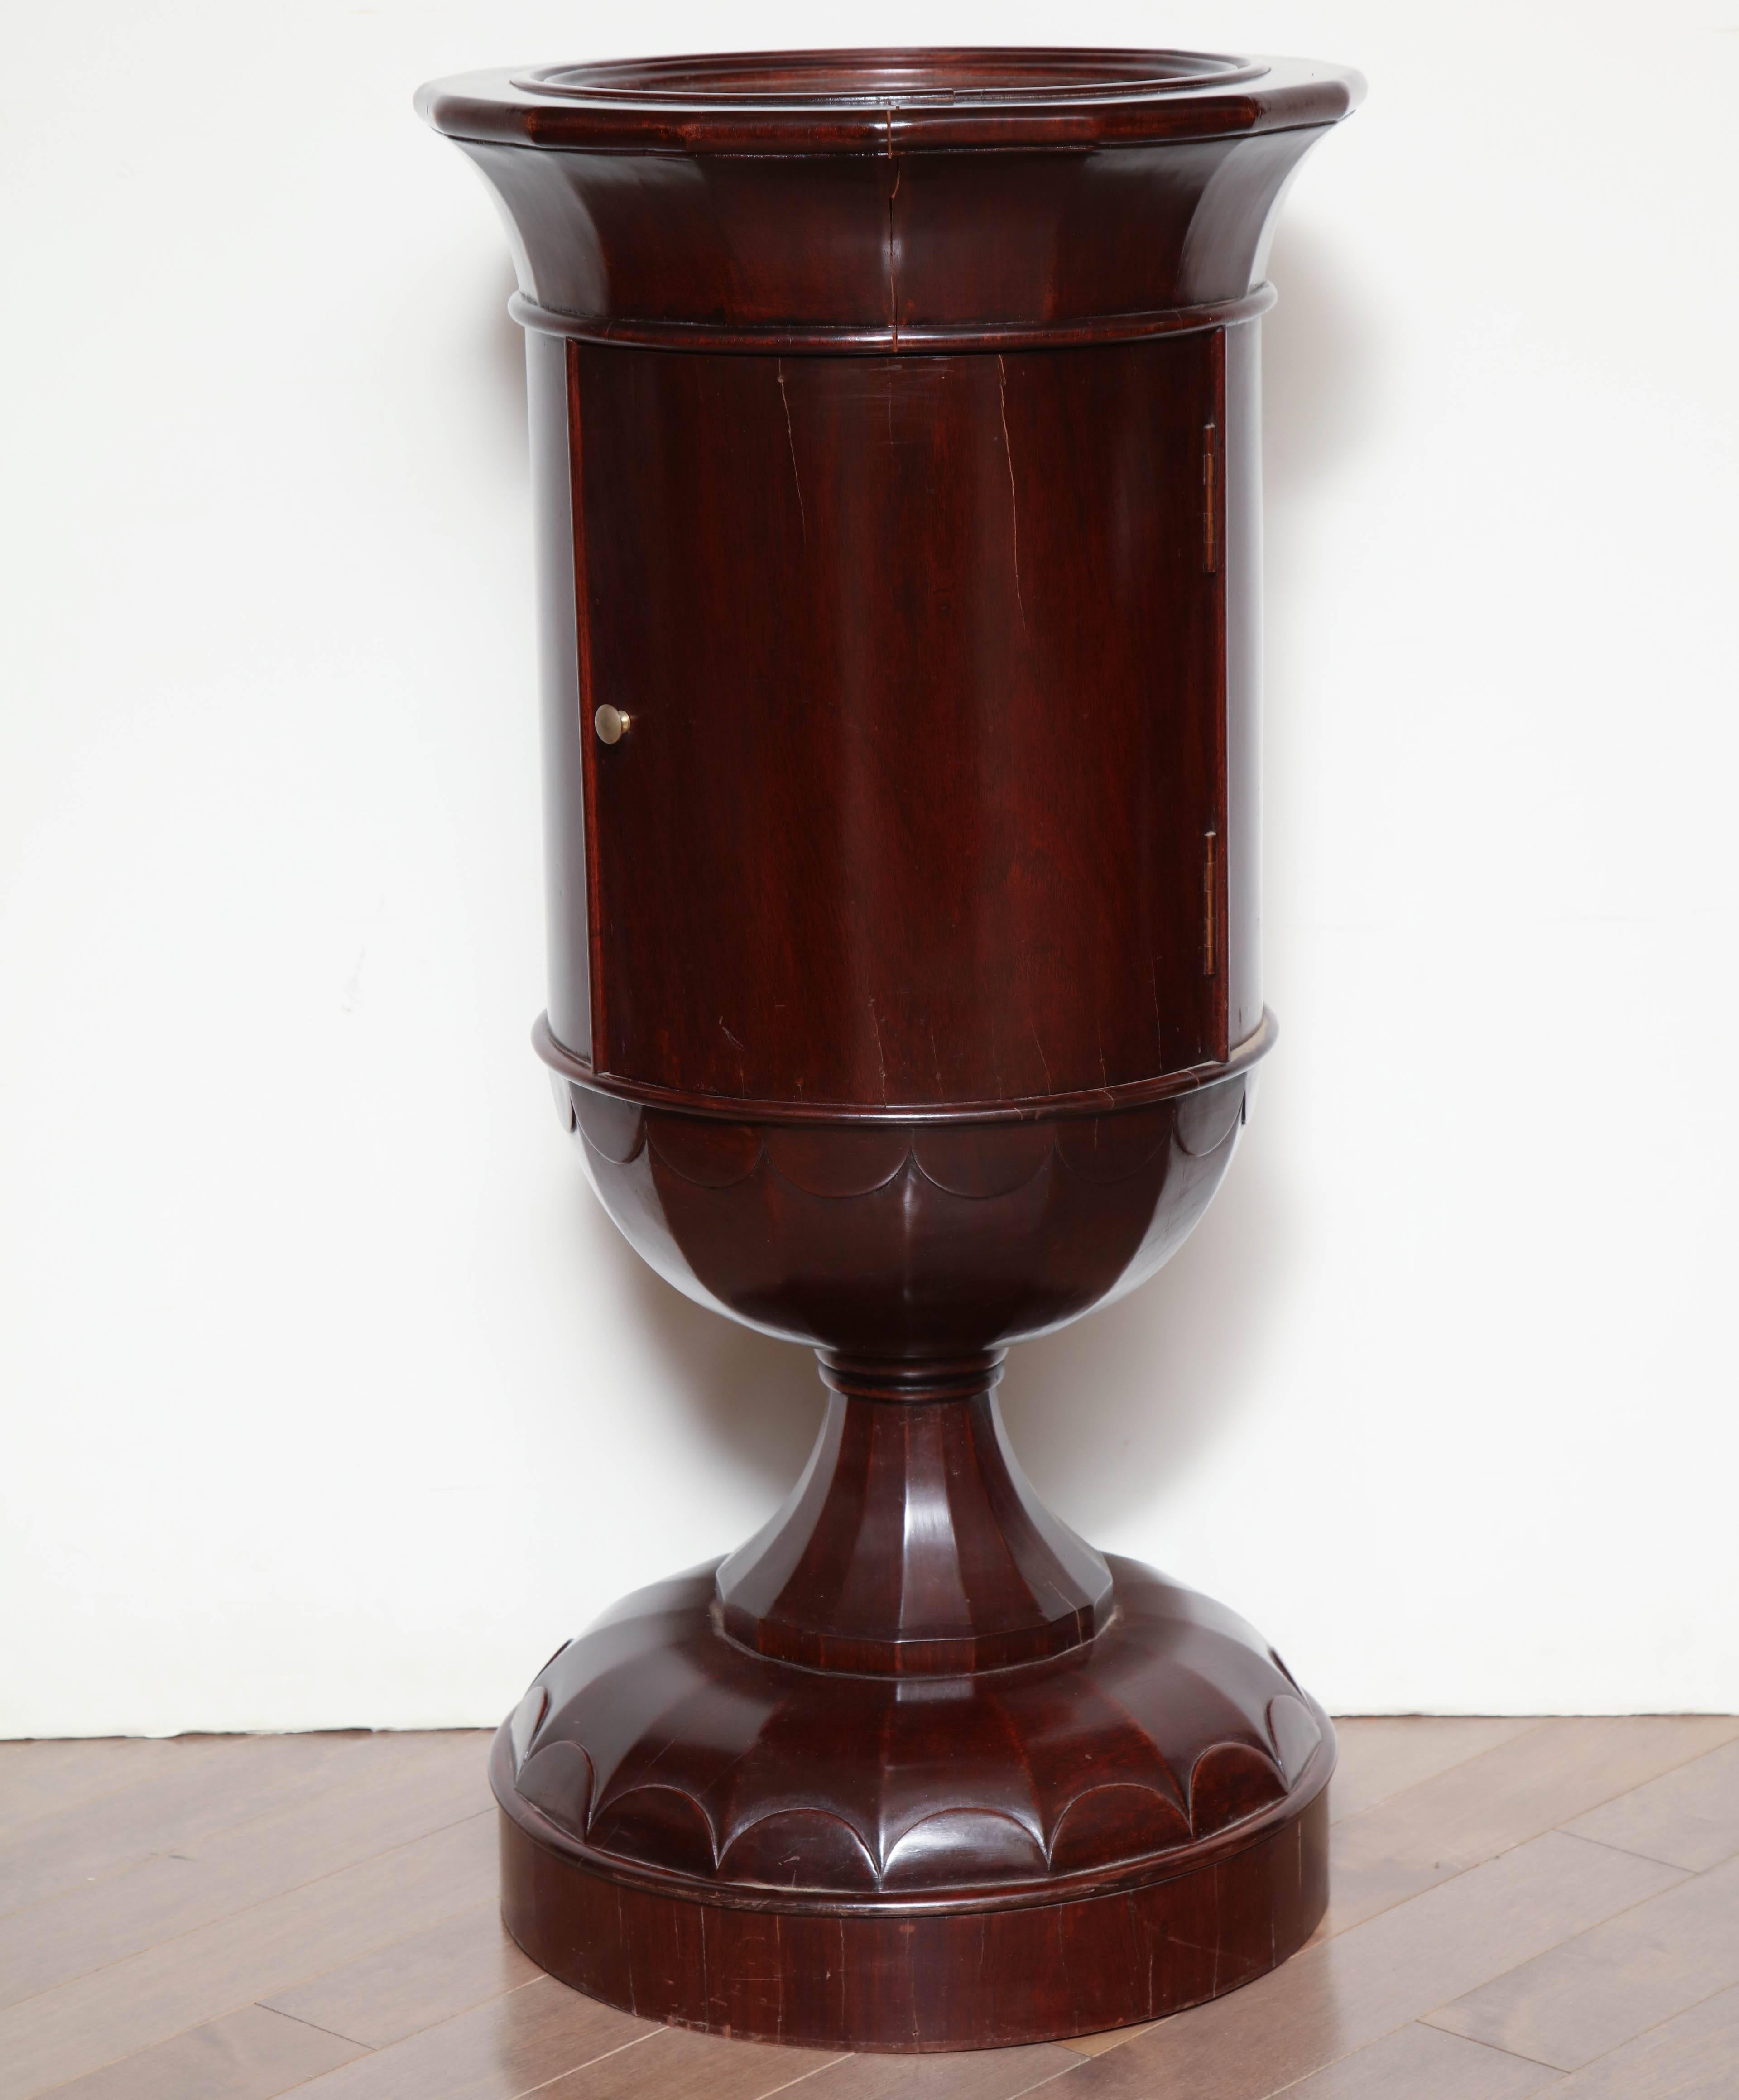 Mid-19th century mahogany pedestal table with marble insert top, in the Manner of Josef Danhauser.